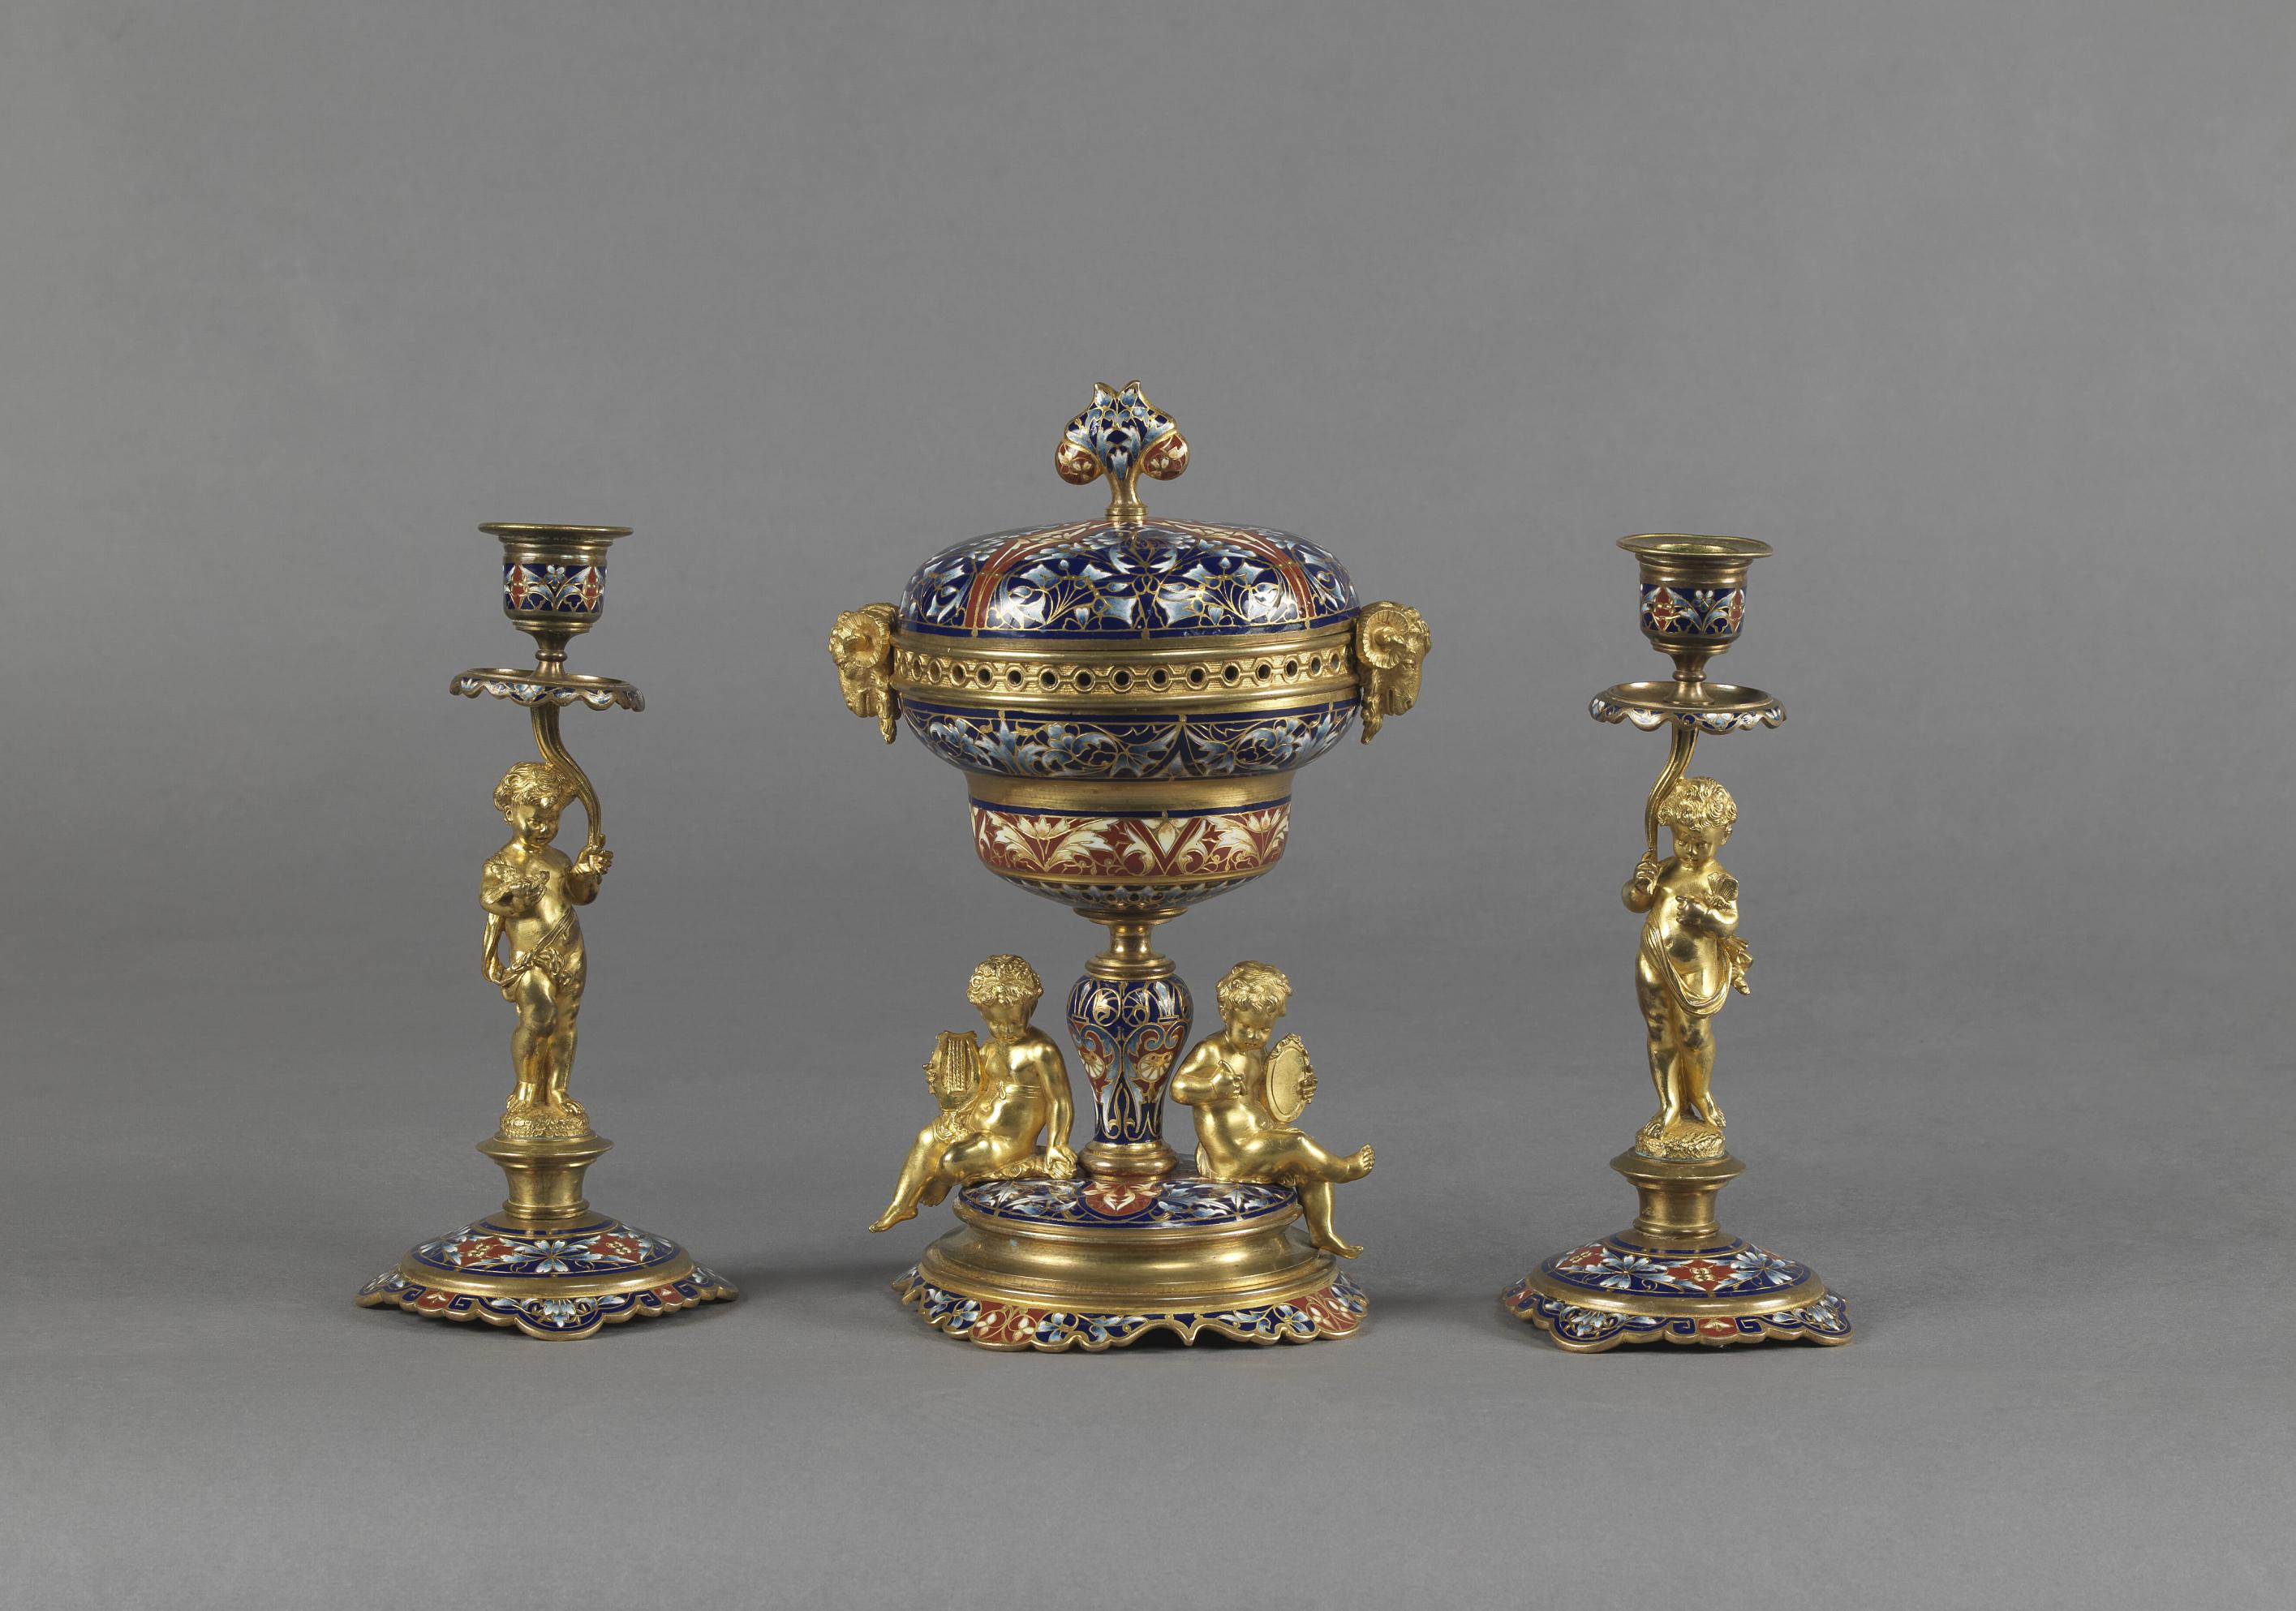 A fine gilt bronze and Champlevé Enamel Garniture Set comprising a pair of candelabra and a brûle-parfum and cover. 

French, circa 1890.

The brûle -parfum or censor with a domed champlevé enamel lid above a gilt bronze pierced guilloche border